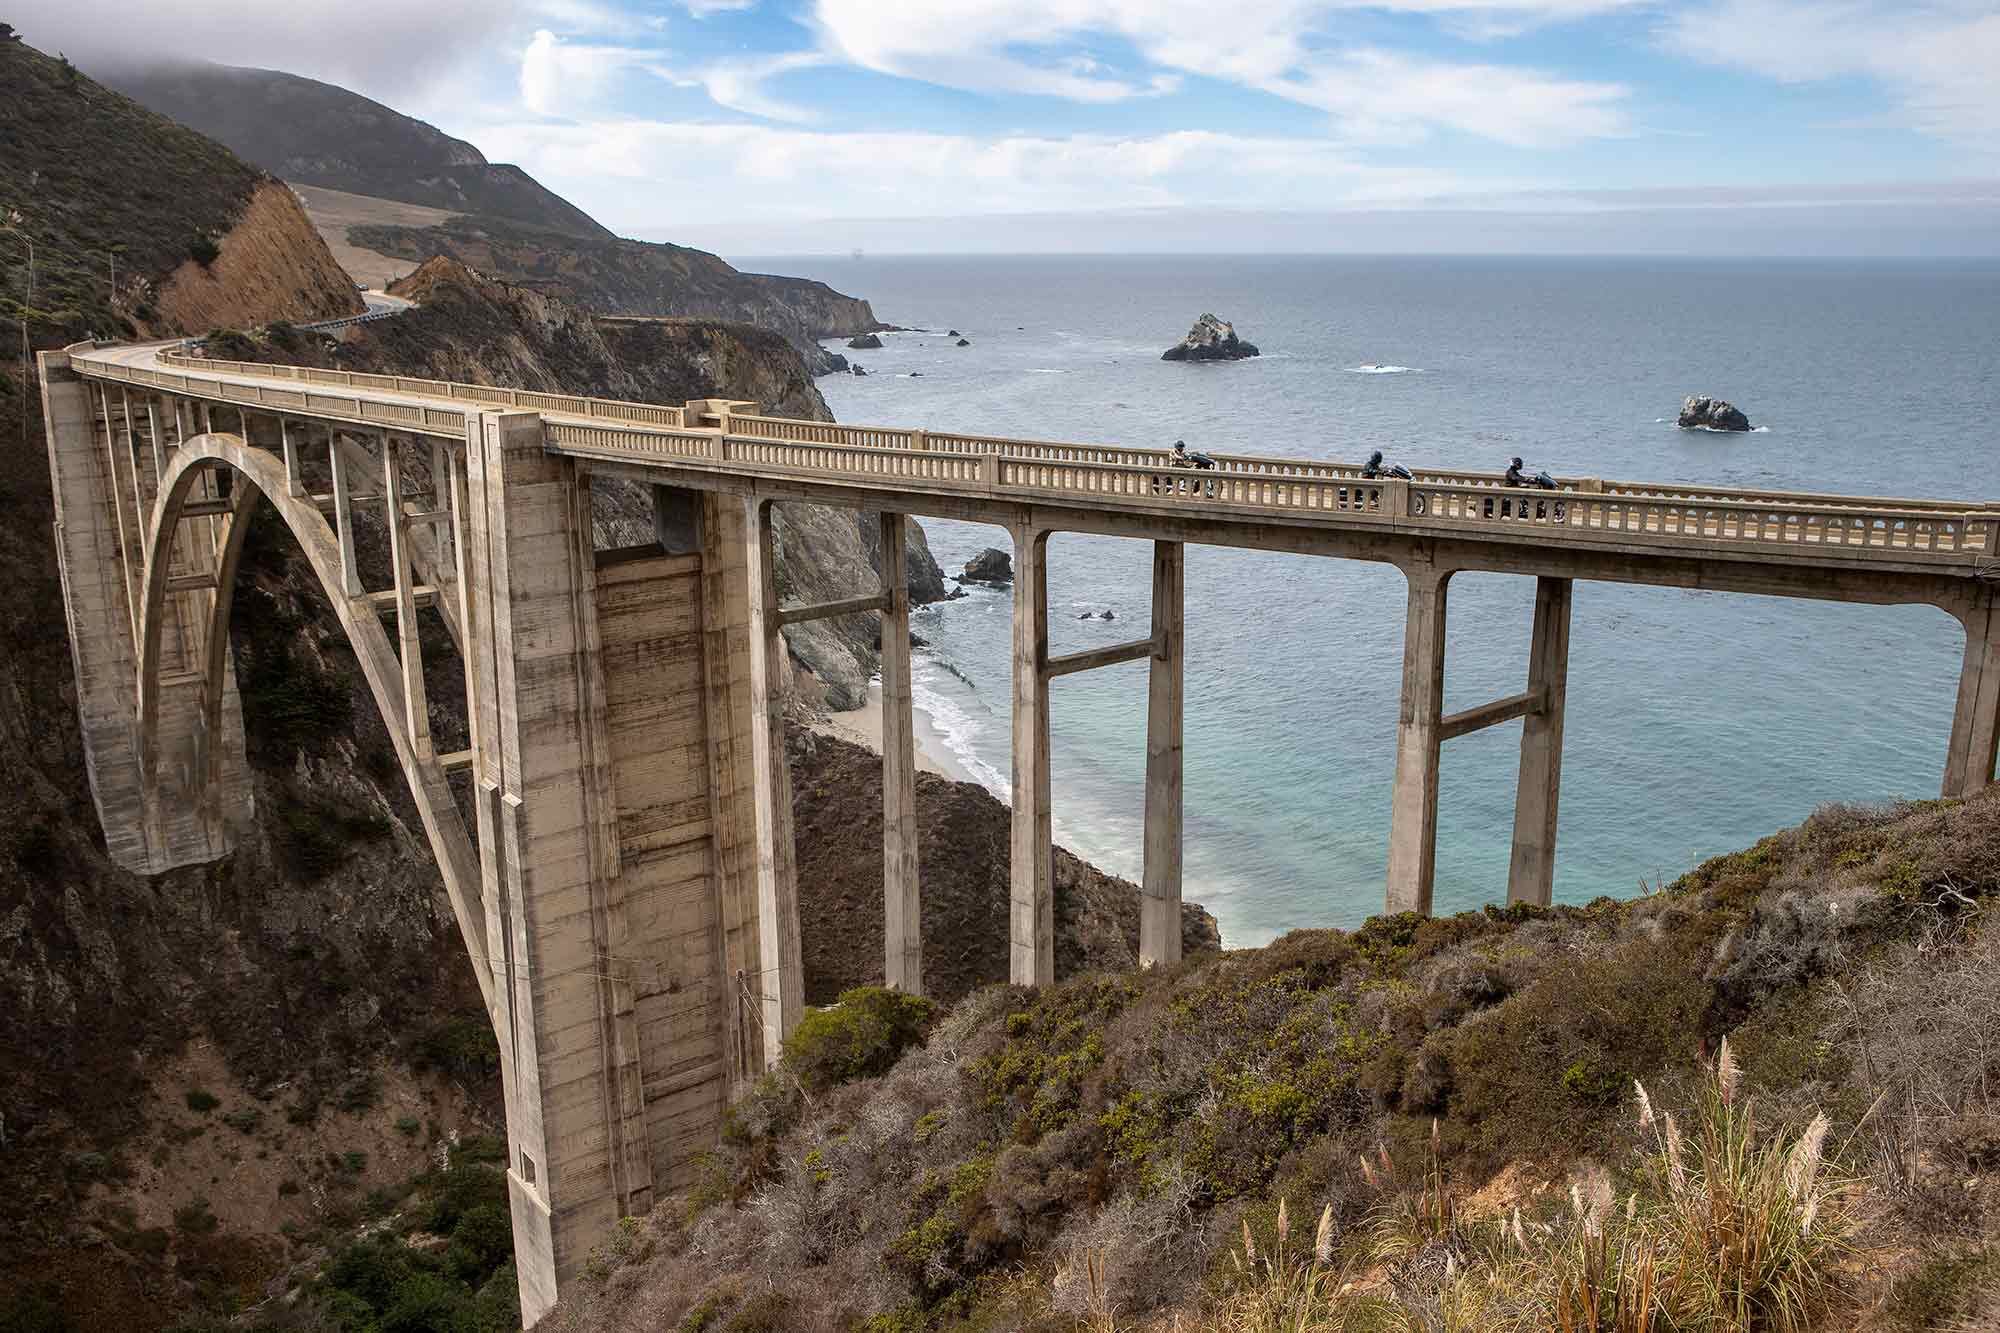 Three baggers crossing Bixby Bridge, the historic landmark that connects northern Big Sur to the rest of Pacific Coast Highway.